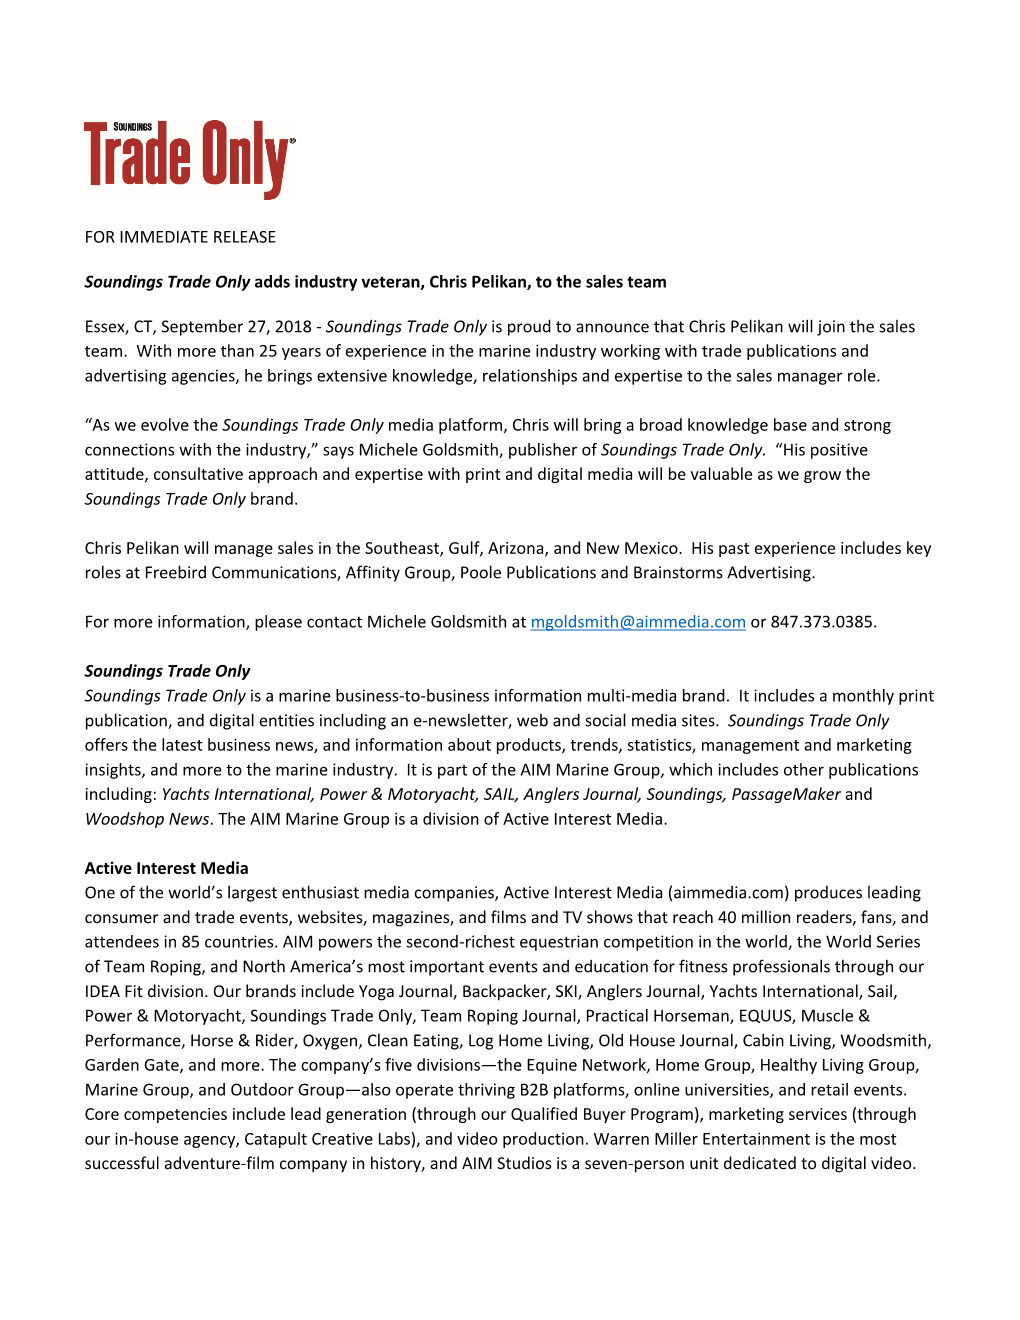 FOR IMMEDIATE RELEASE Soundings Trade Only Adds